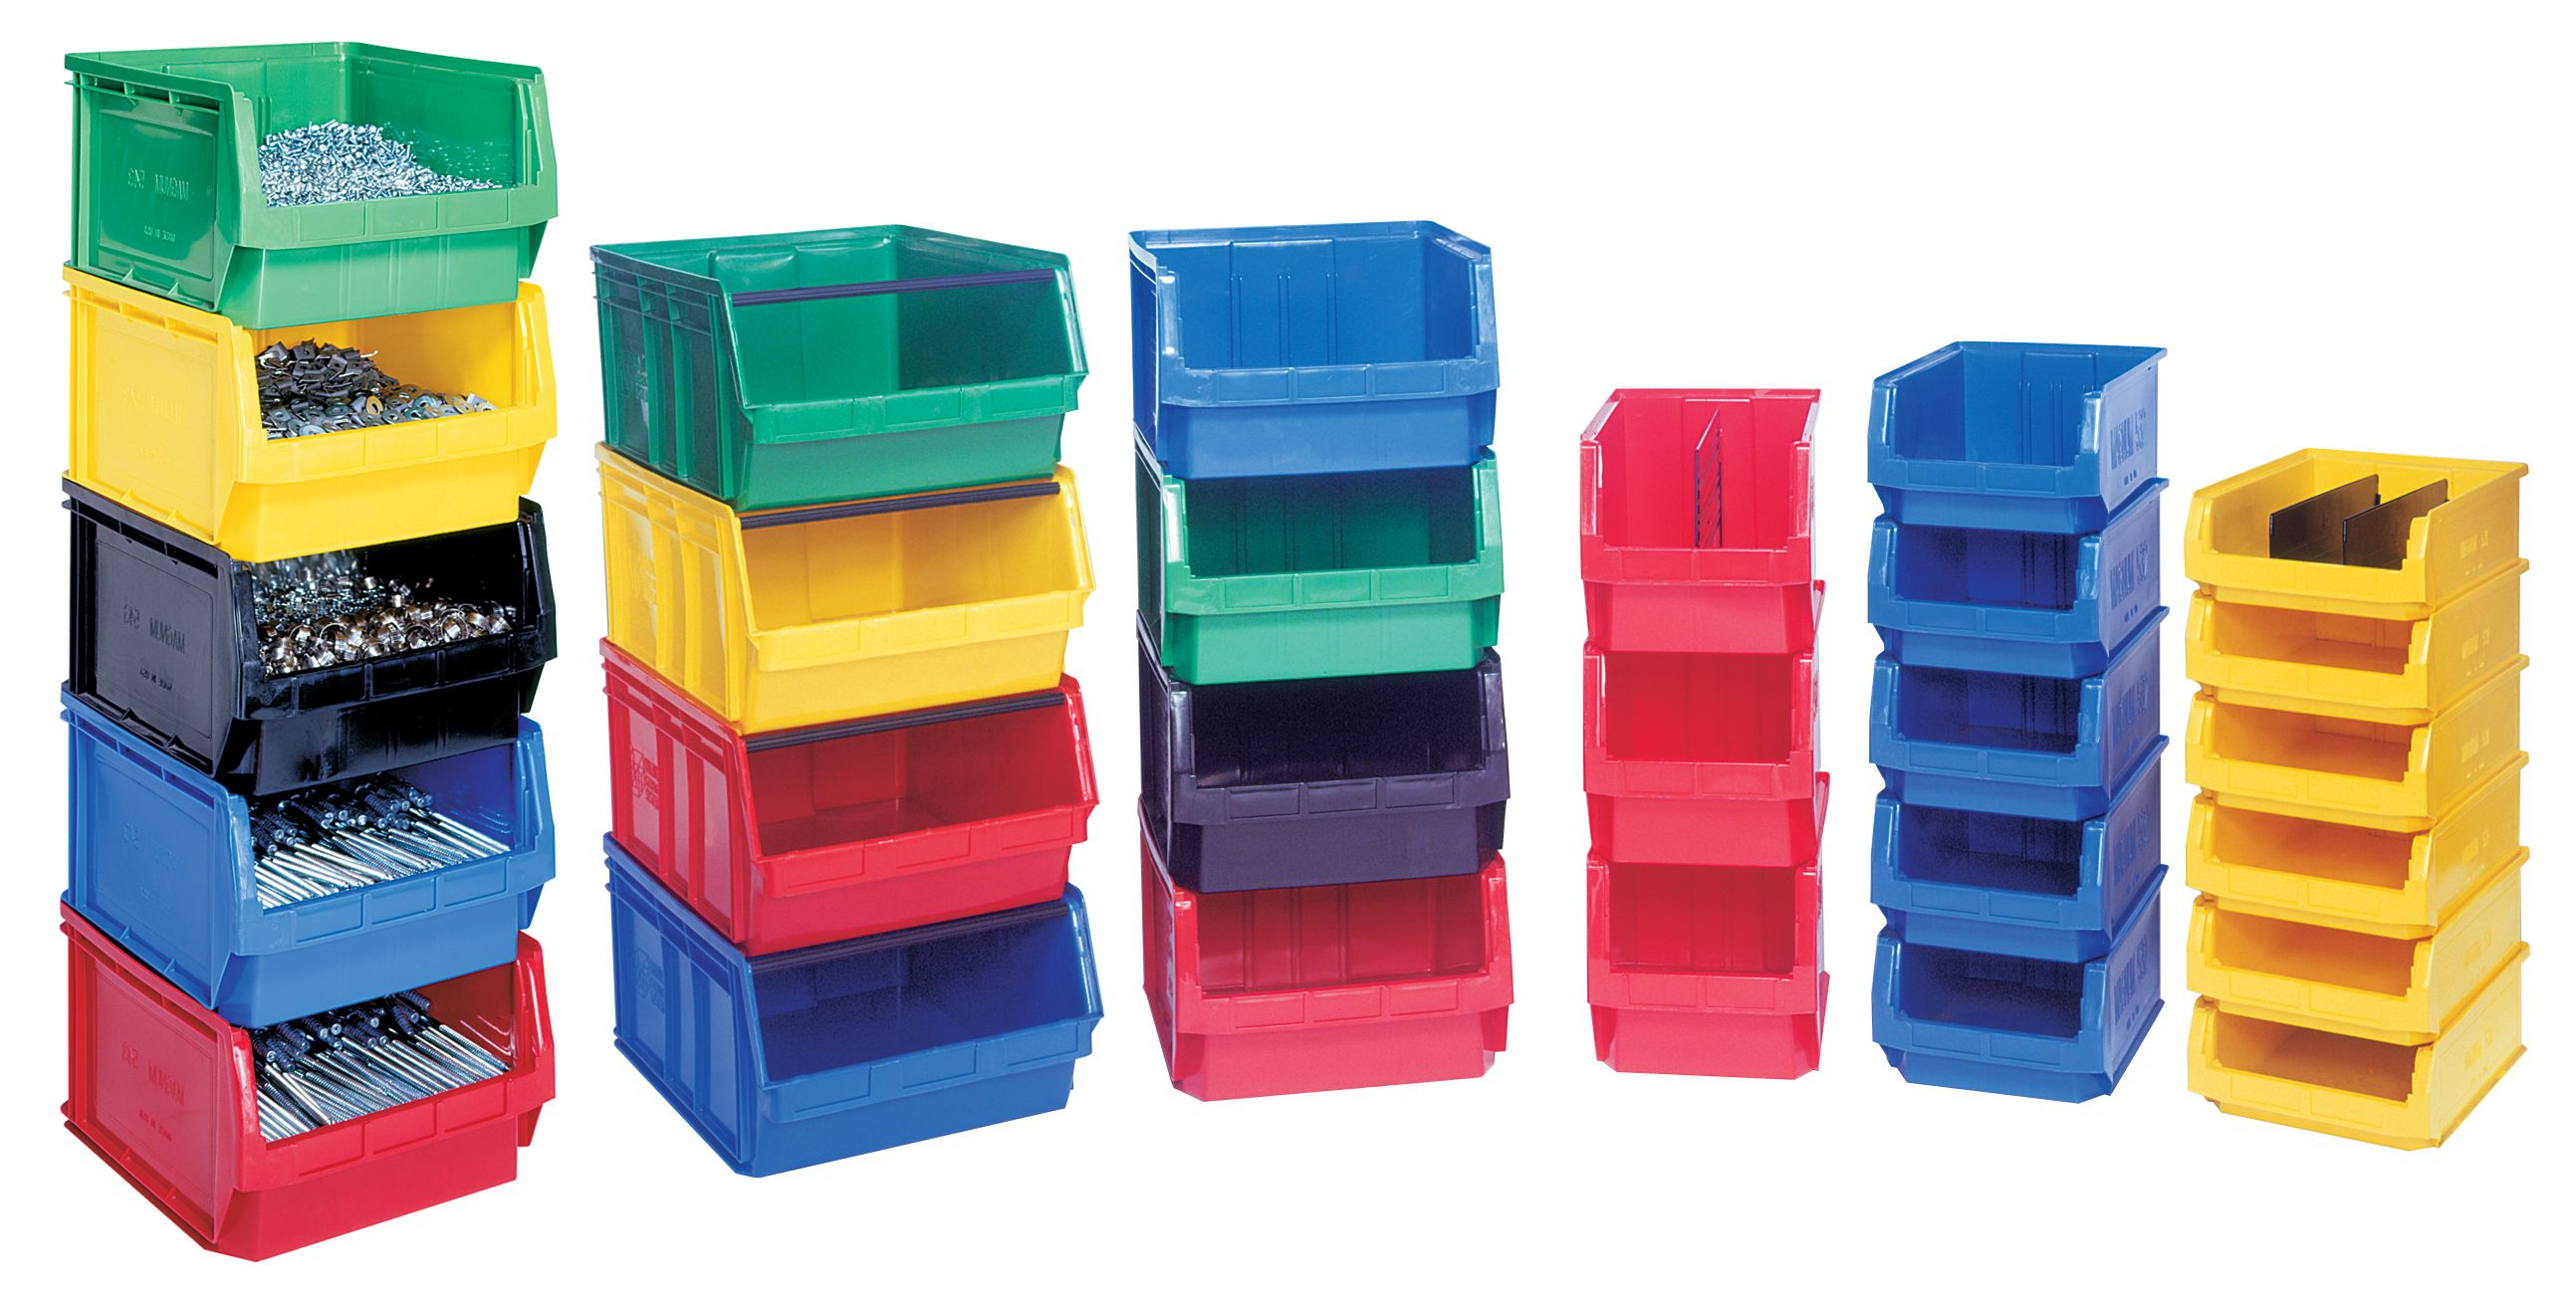 Stackable Plastic Storage Bins Useful For Modern Home Decoration pertaining to dimensions 2587 X 1305